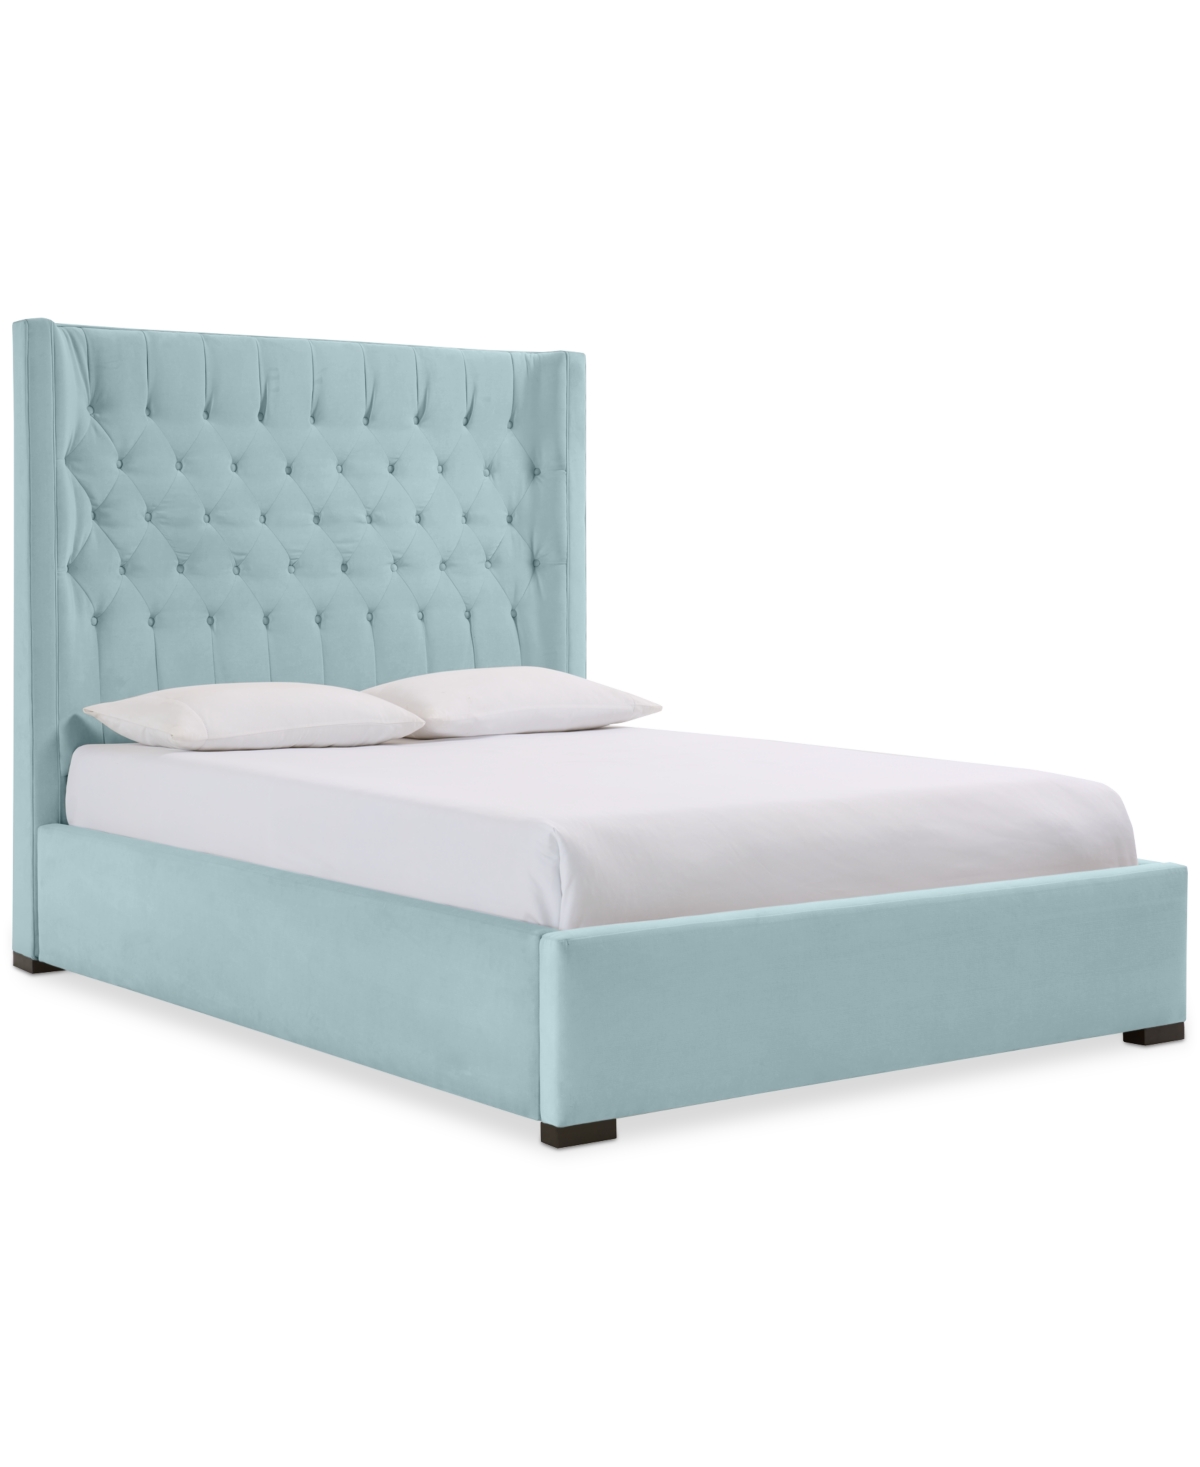 Furniture Cadelyn Upholstered Queen Bed In Quarny